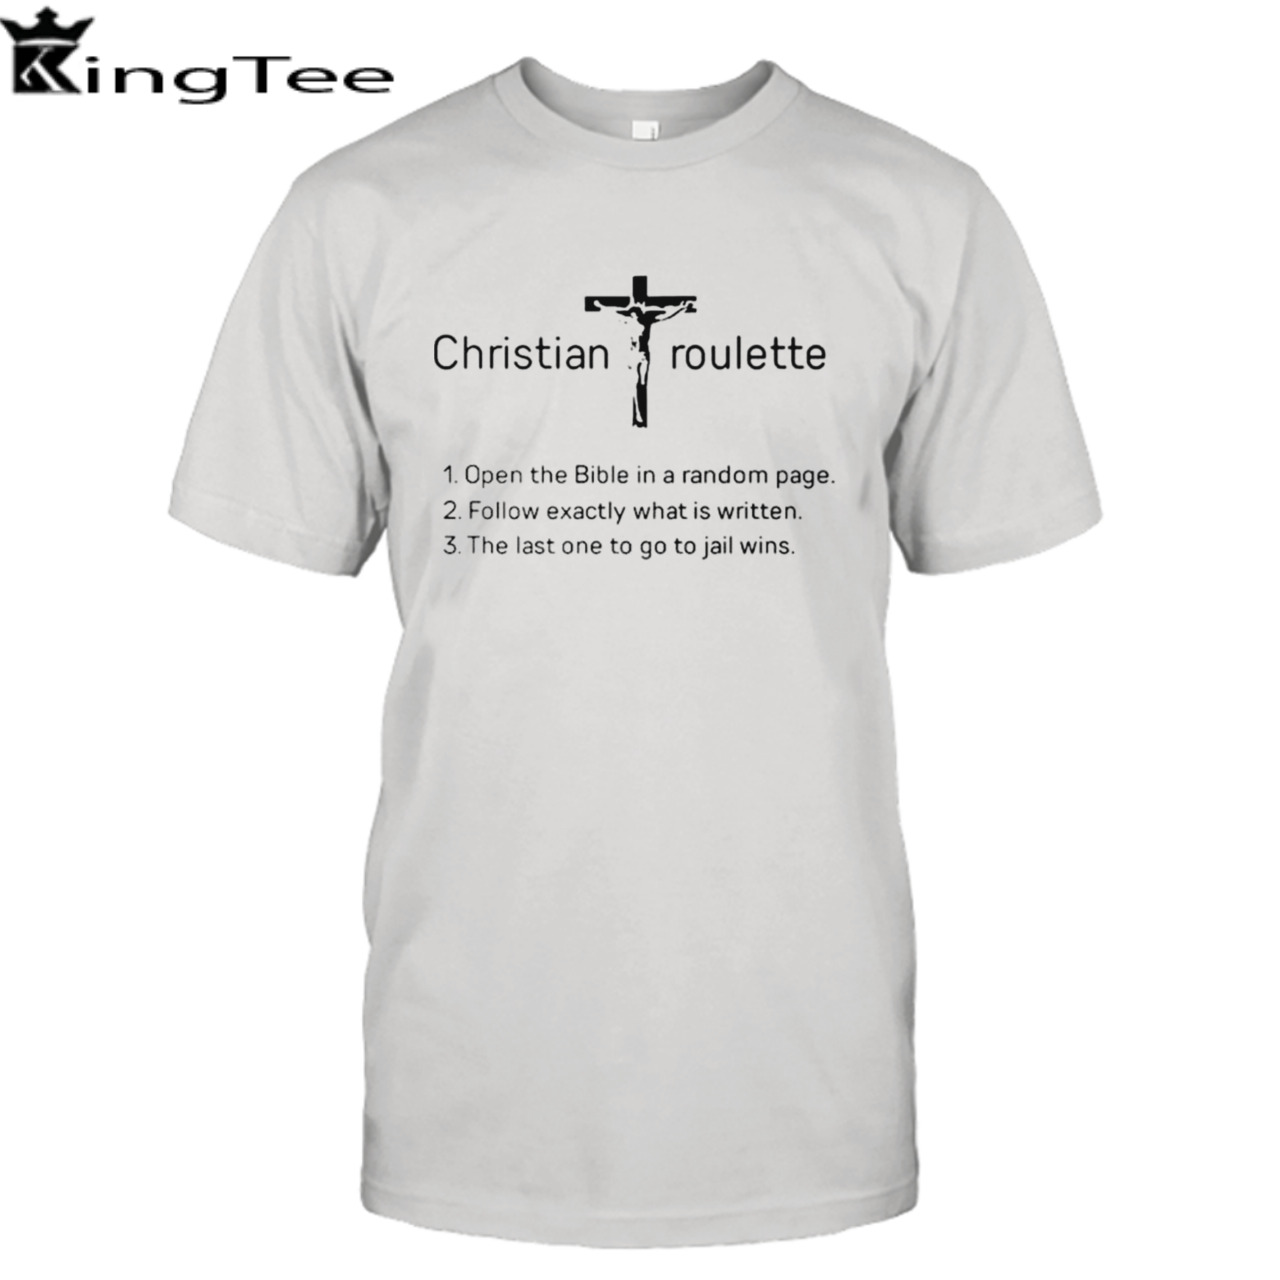 Christian roulette open the bible in a random page shirt